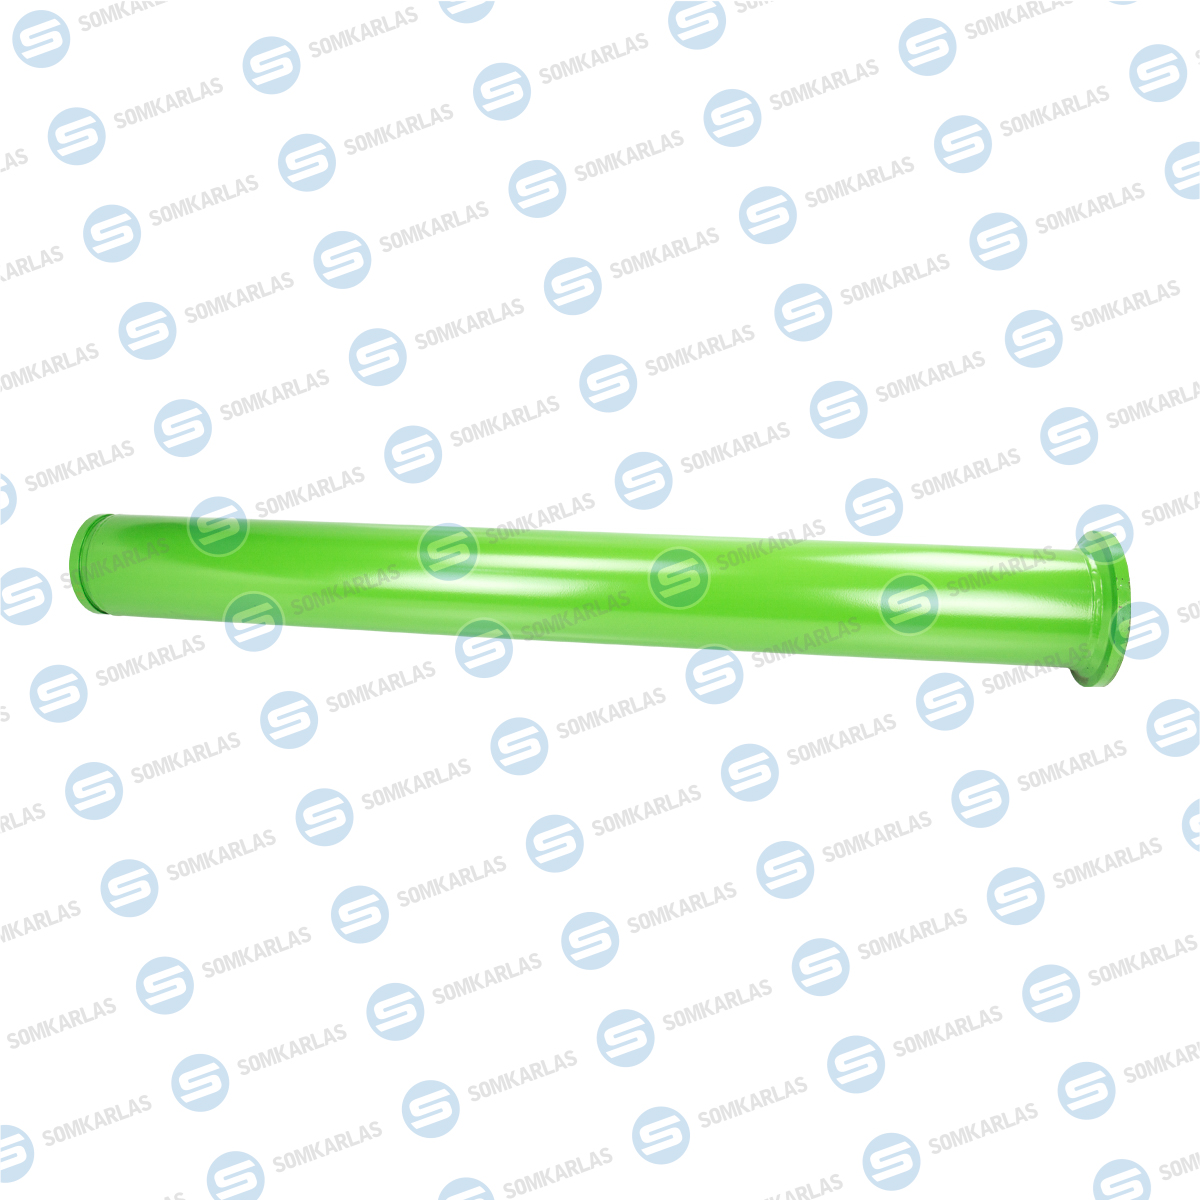 SOM30260 - DELIVERY TUBE DN 150 1600 MM - 